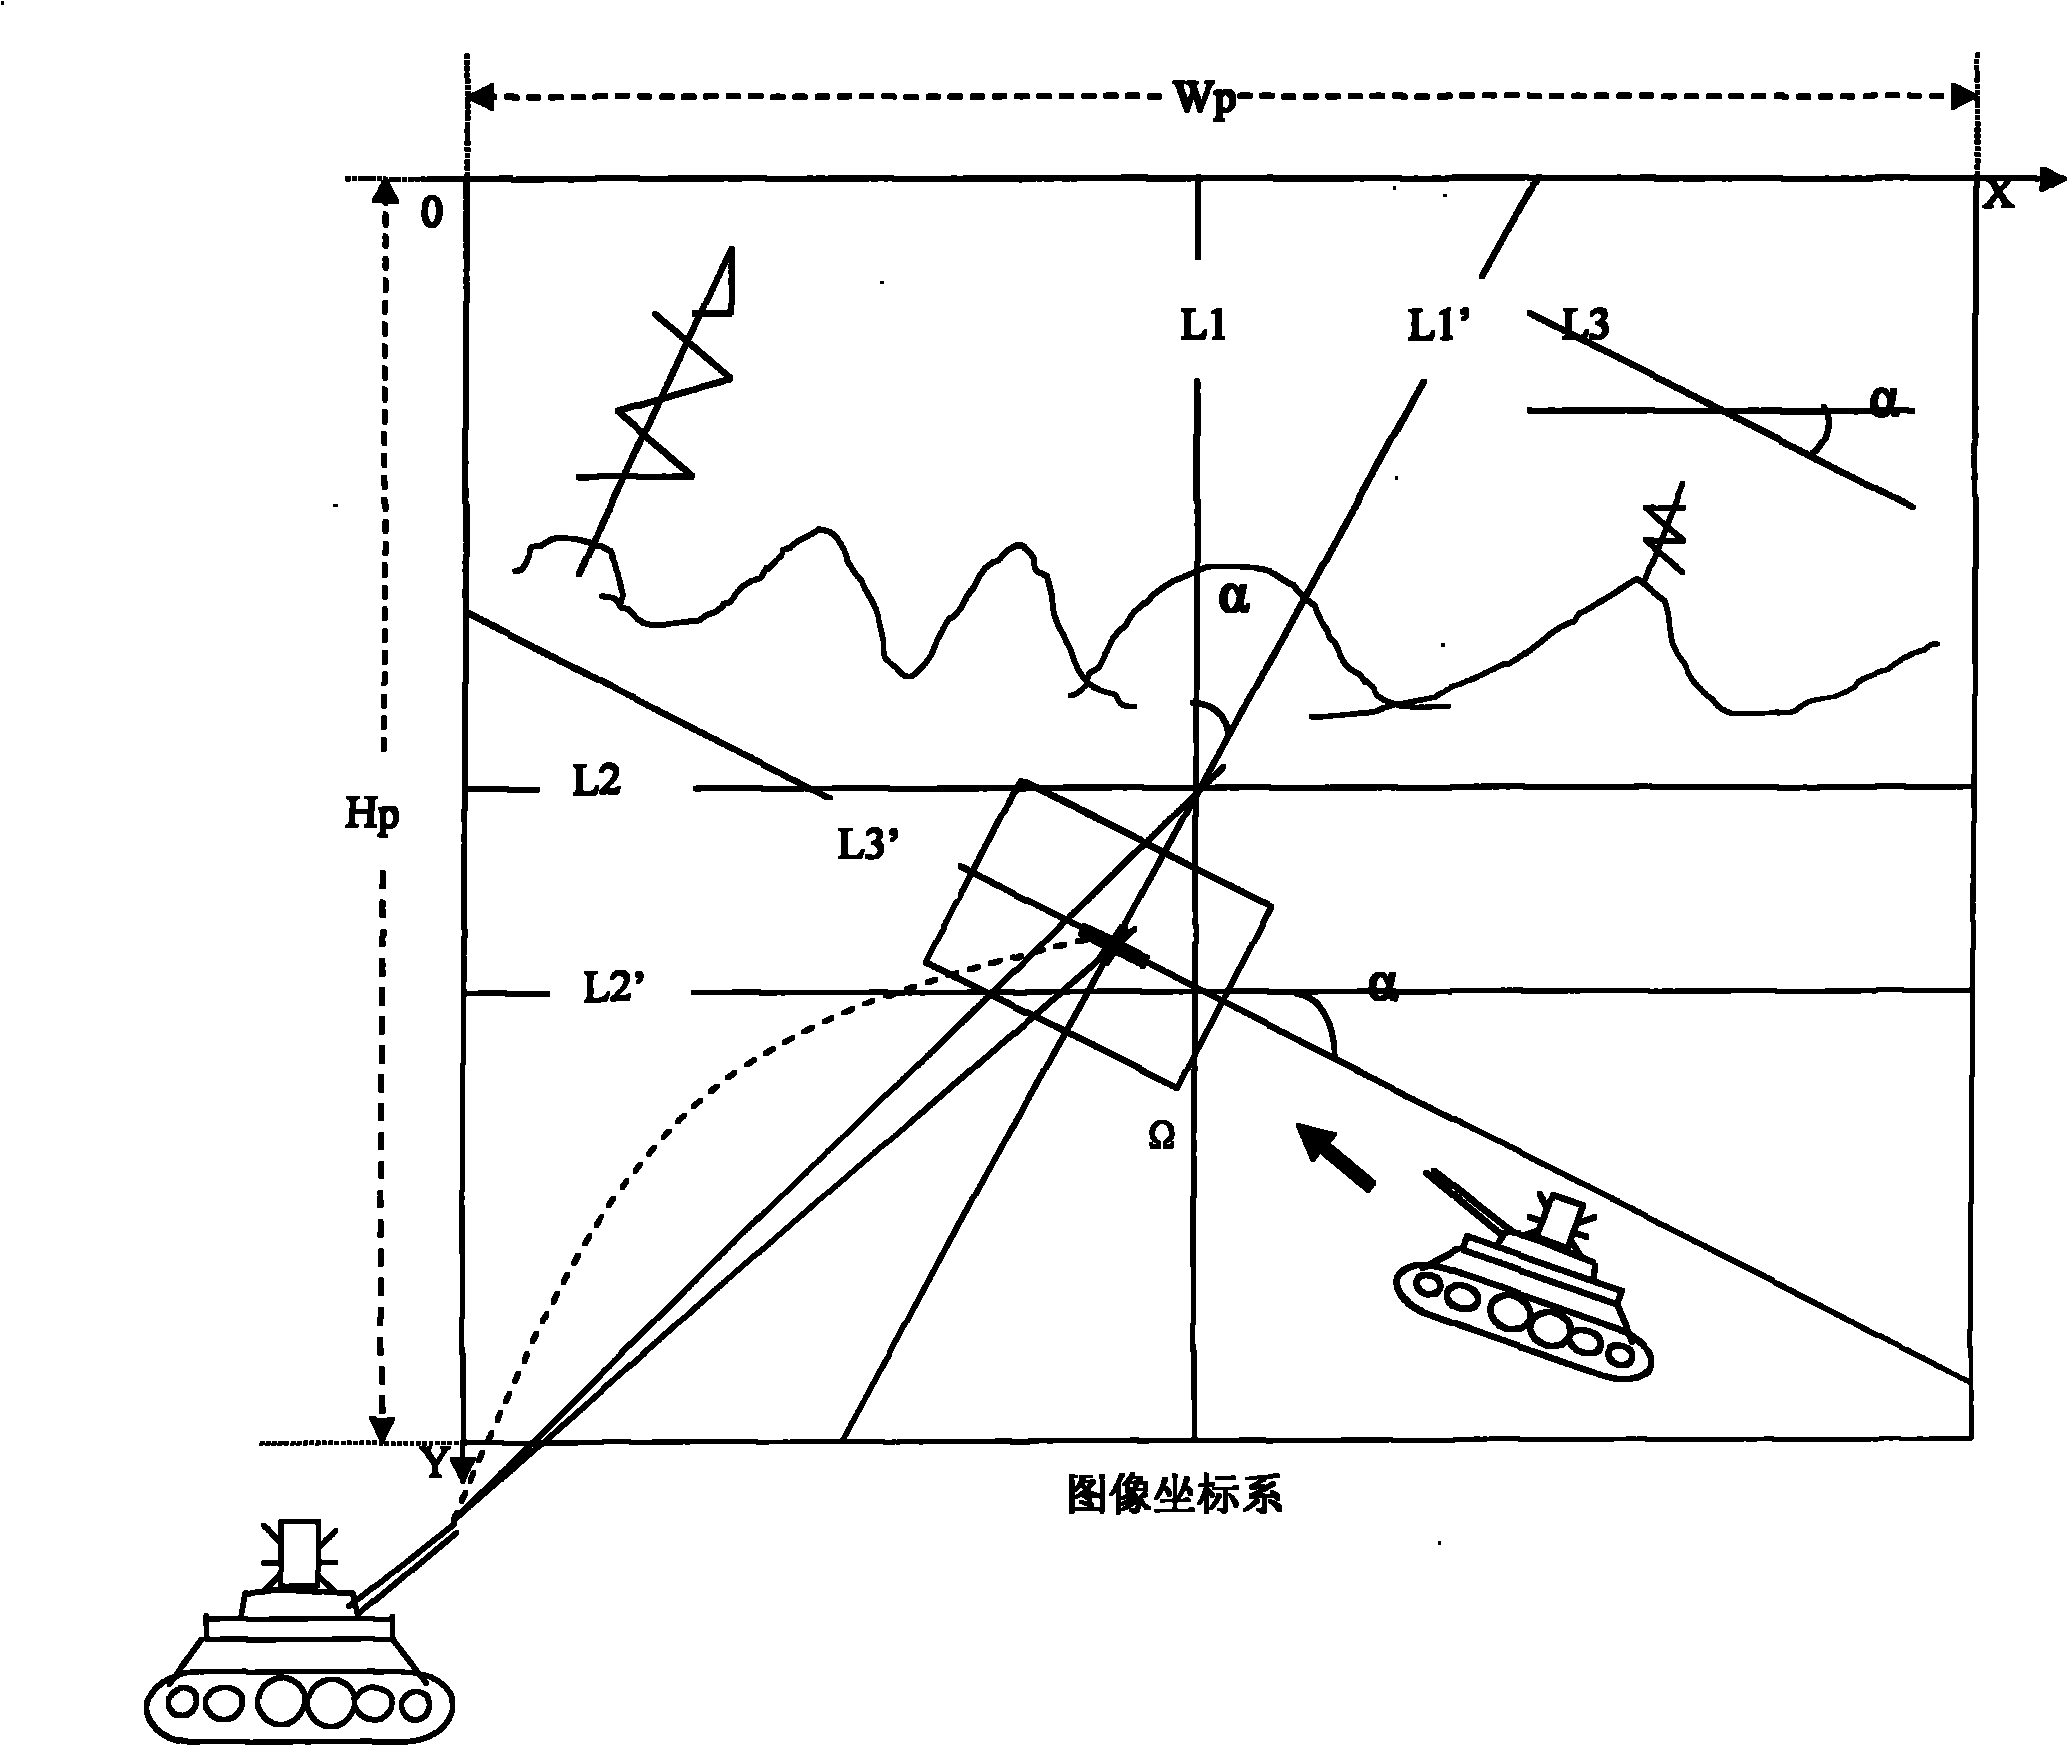 Method for judging targeting of simulated shooting for tank element training based on image analysis